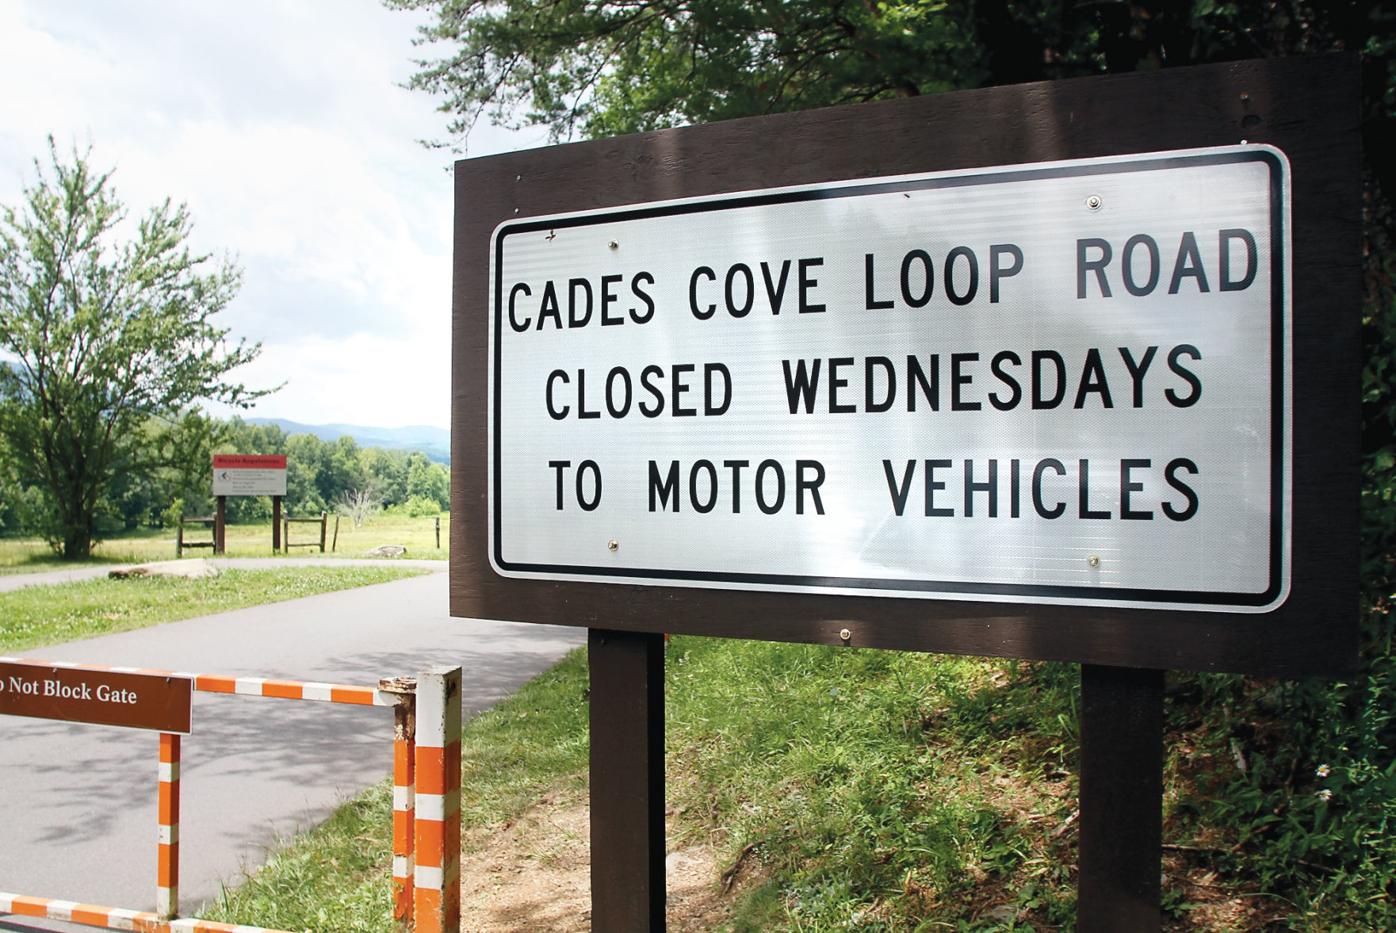 Free range Cades Cove starts vehiclefree Wednesdays with a little